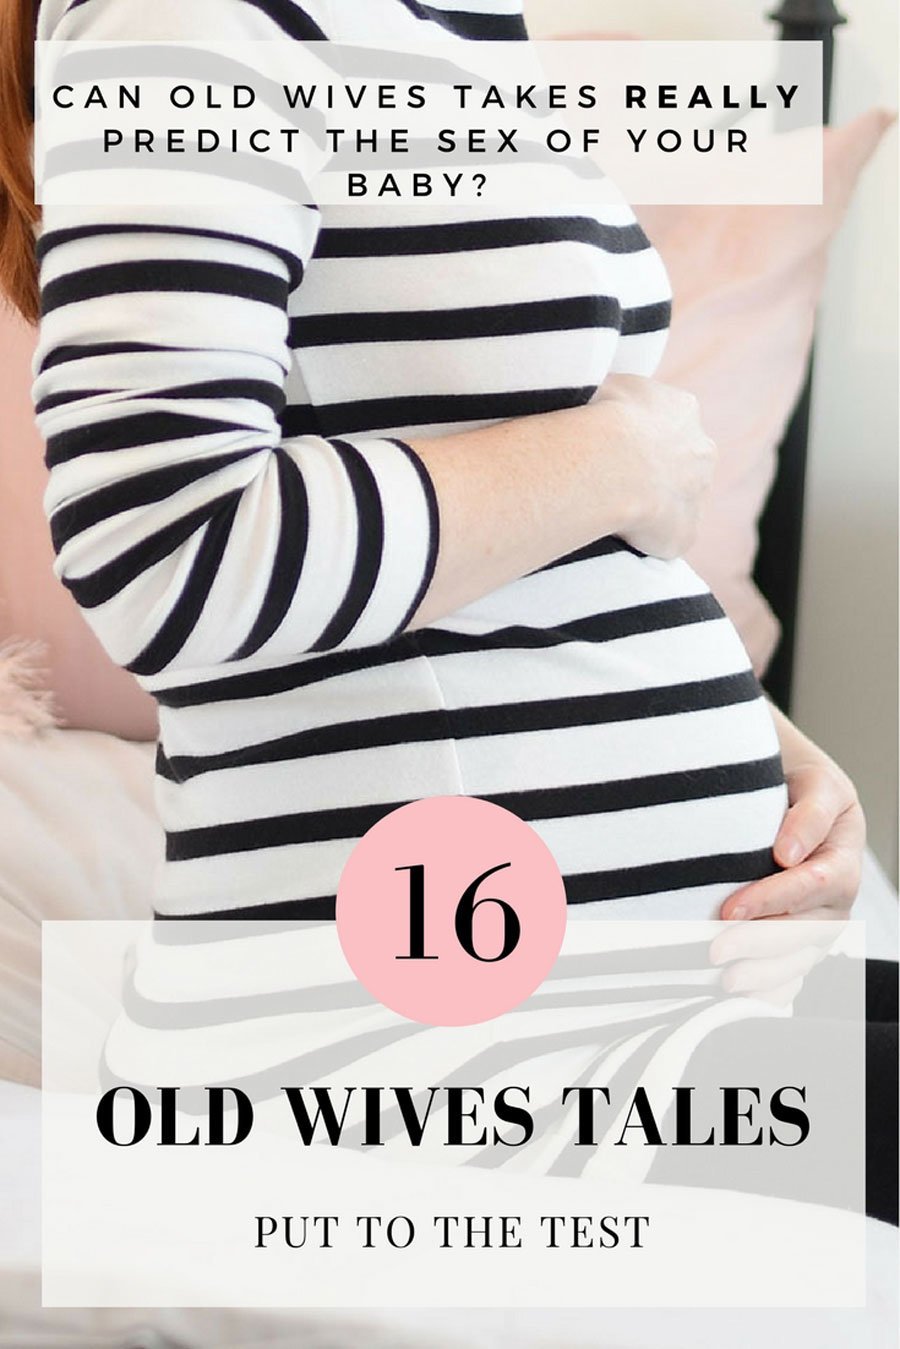 Can old wives tales really predict the sex of a baby? ⋆ By Forever Amber